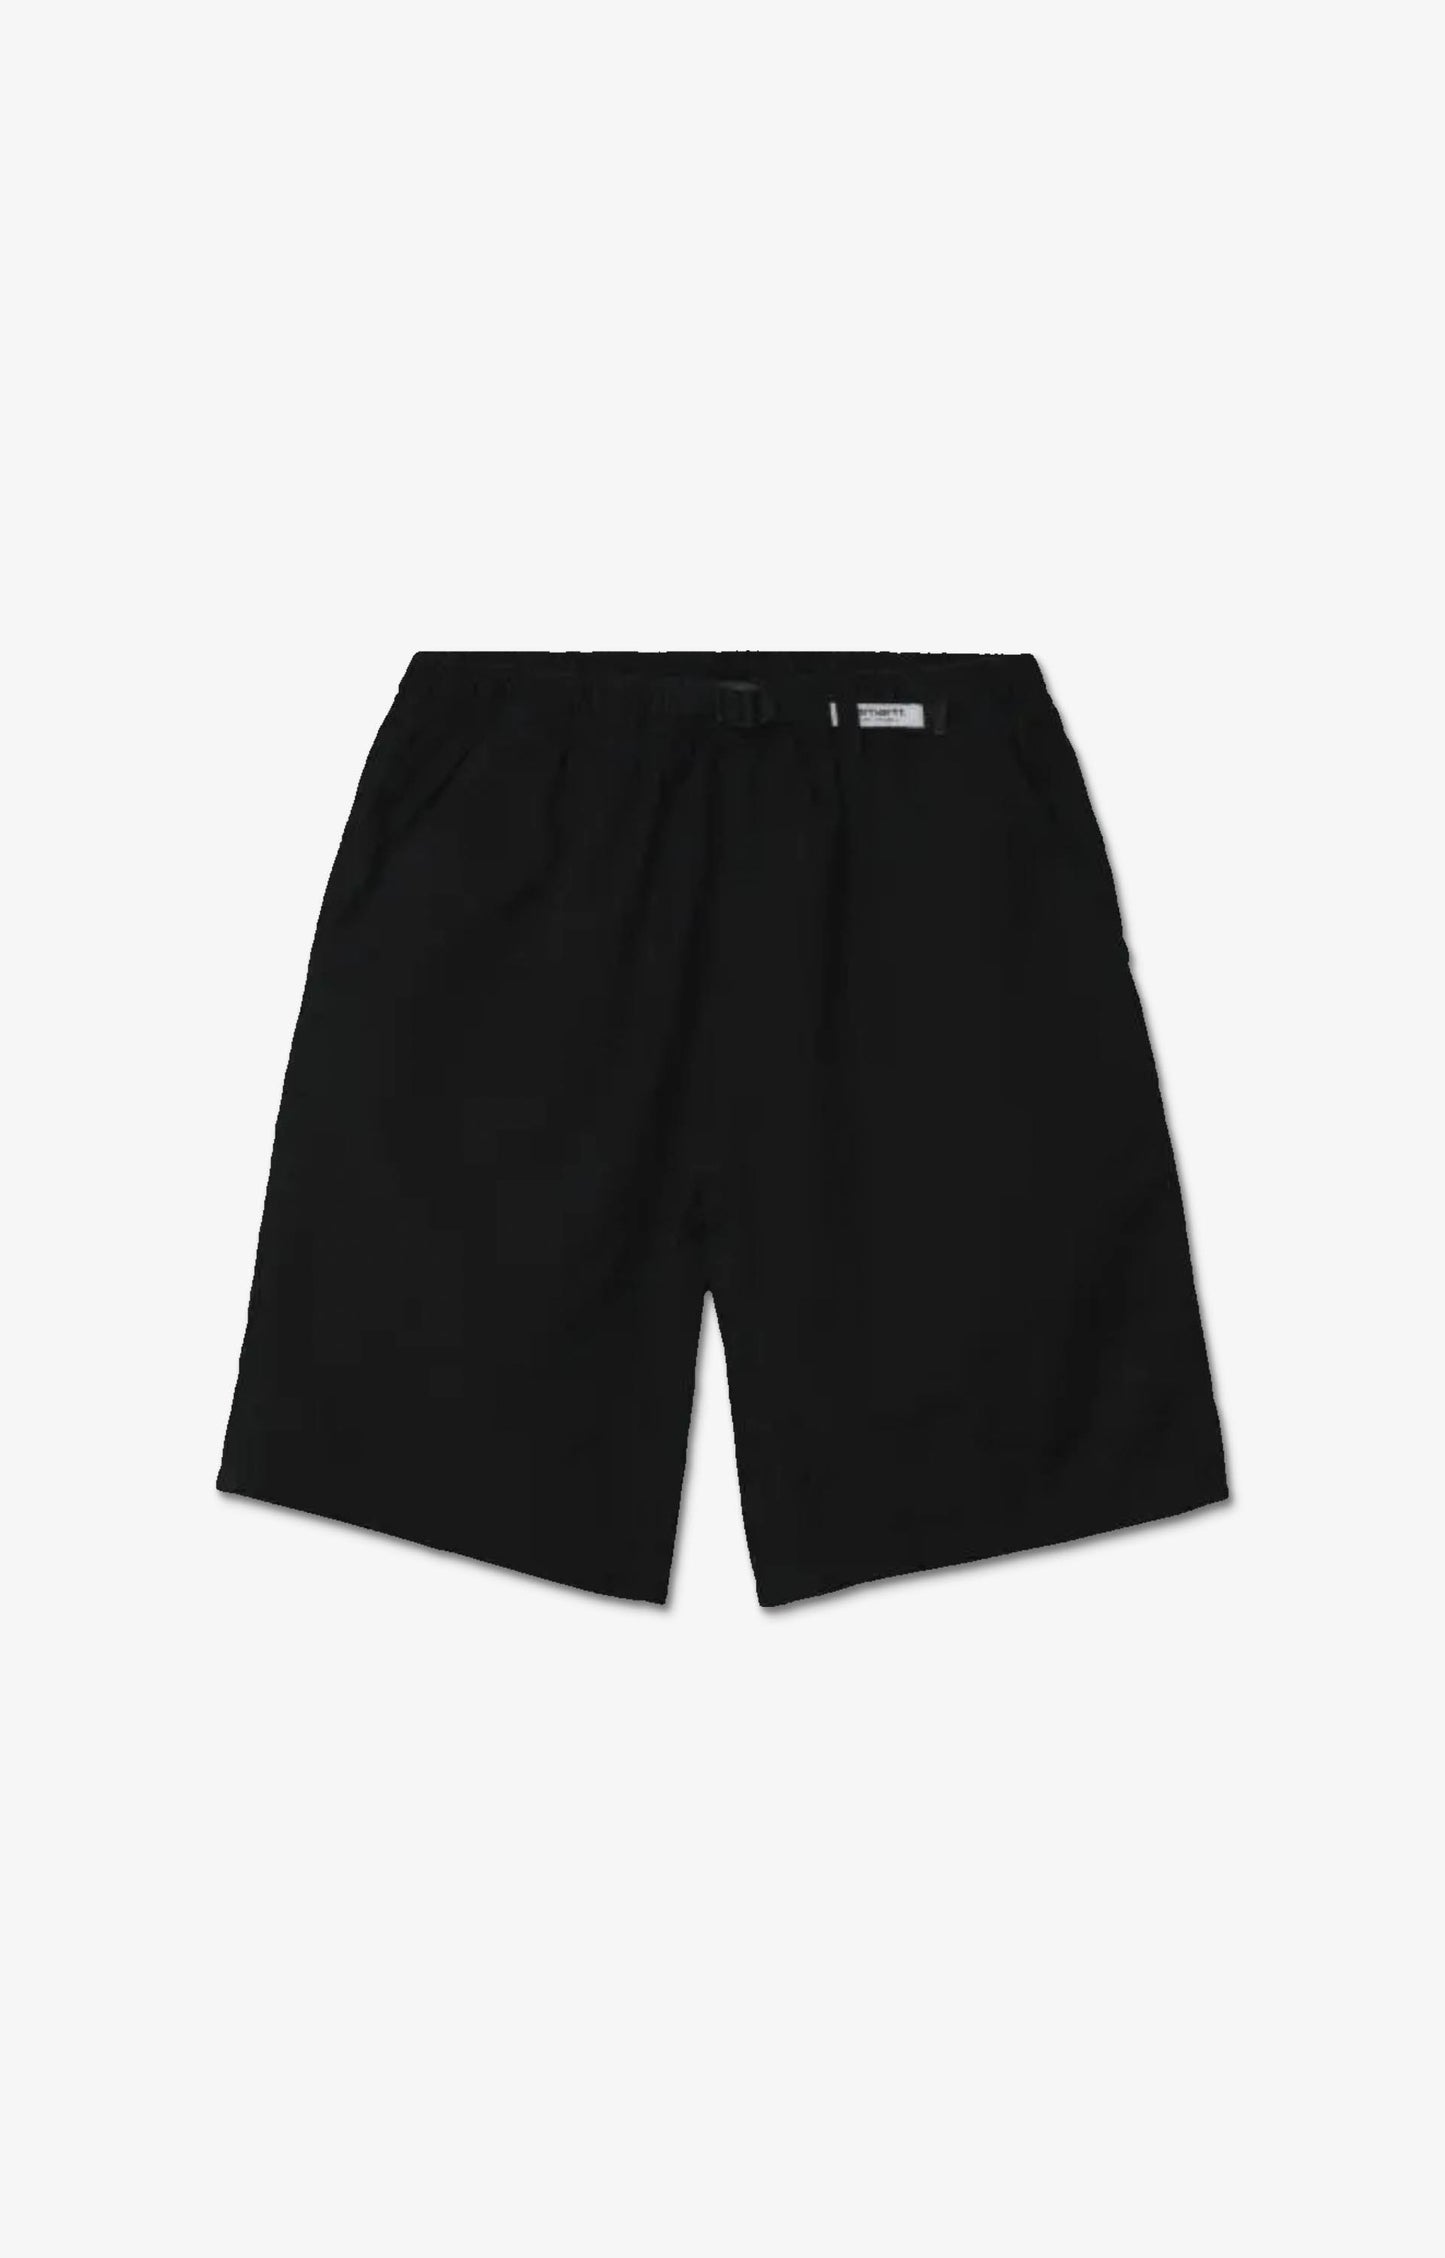 Carhartt WIP Clover Shorts, Black Stone Washed